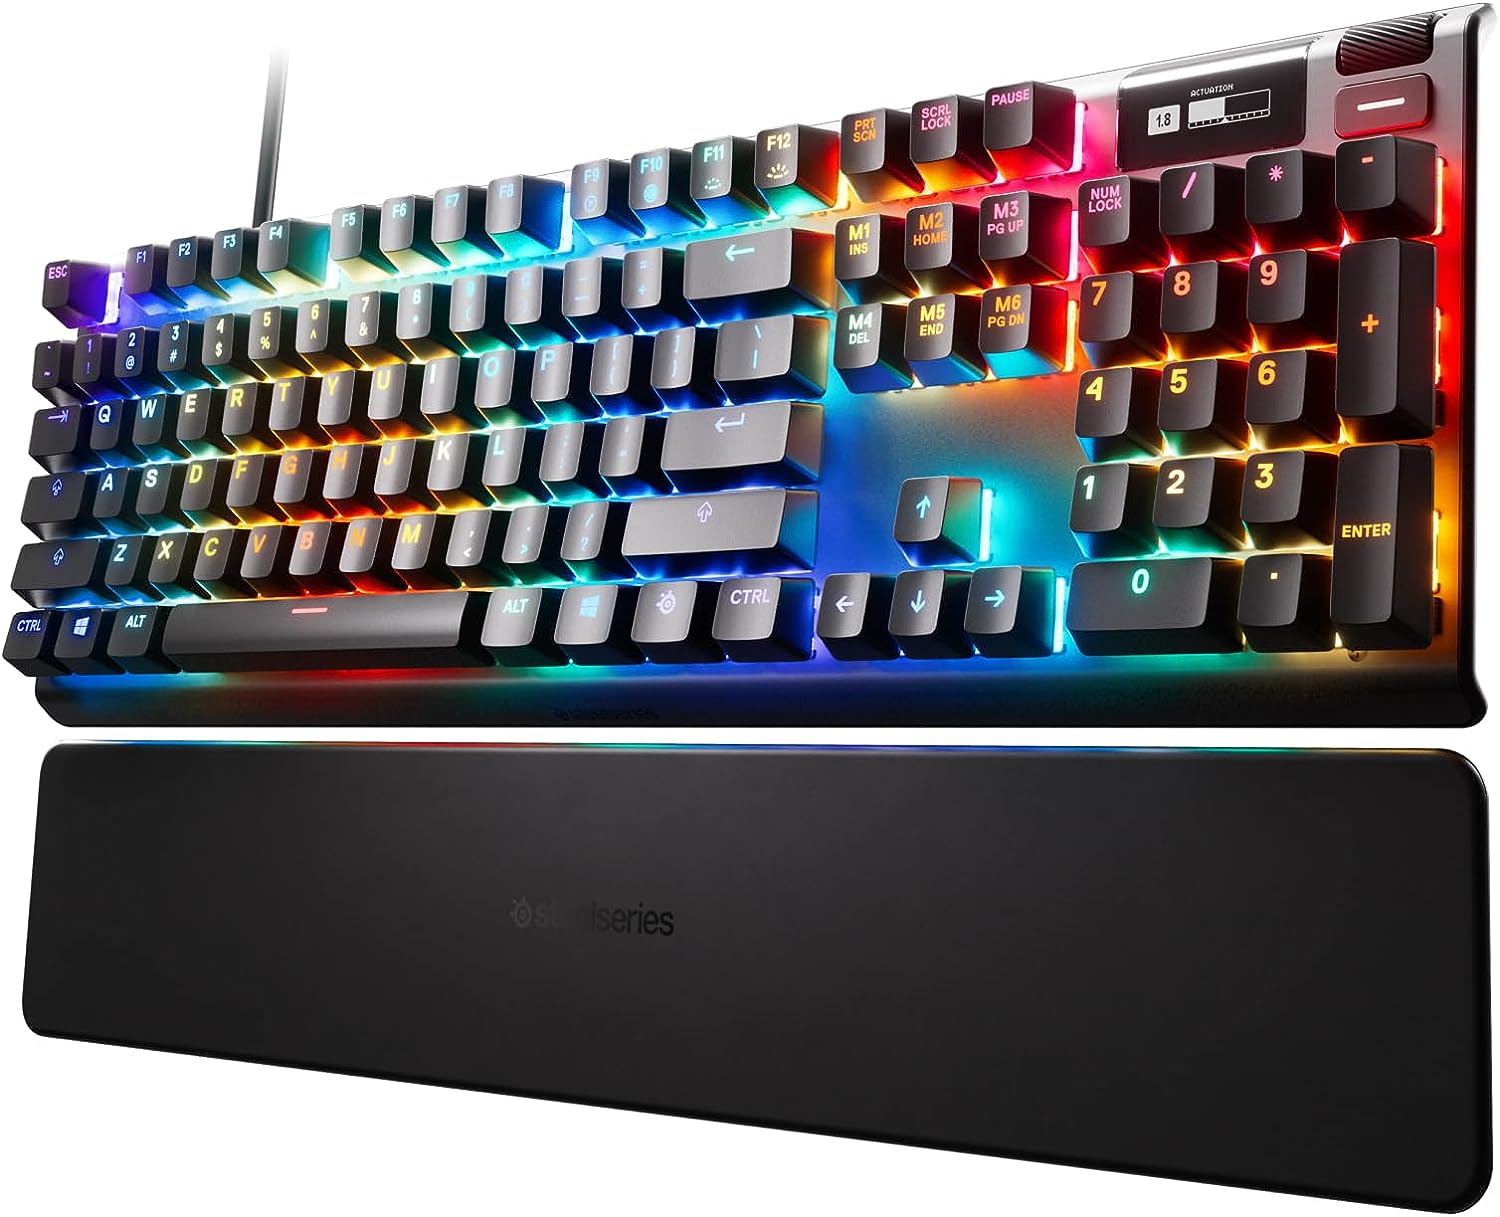 SteelSeries Apex Pro keyboard with Rapid Trigger functionality